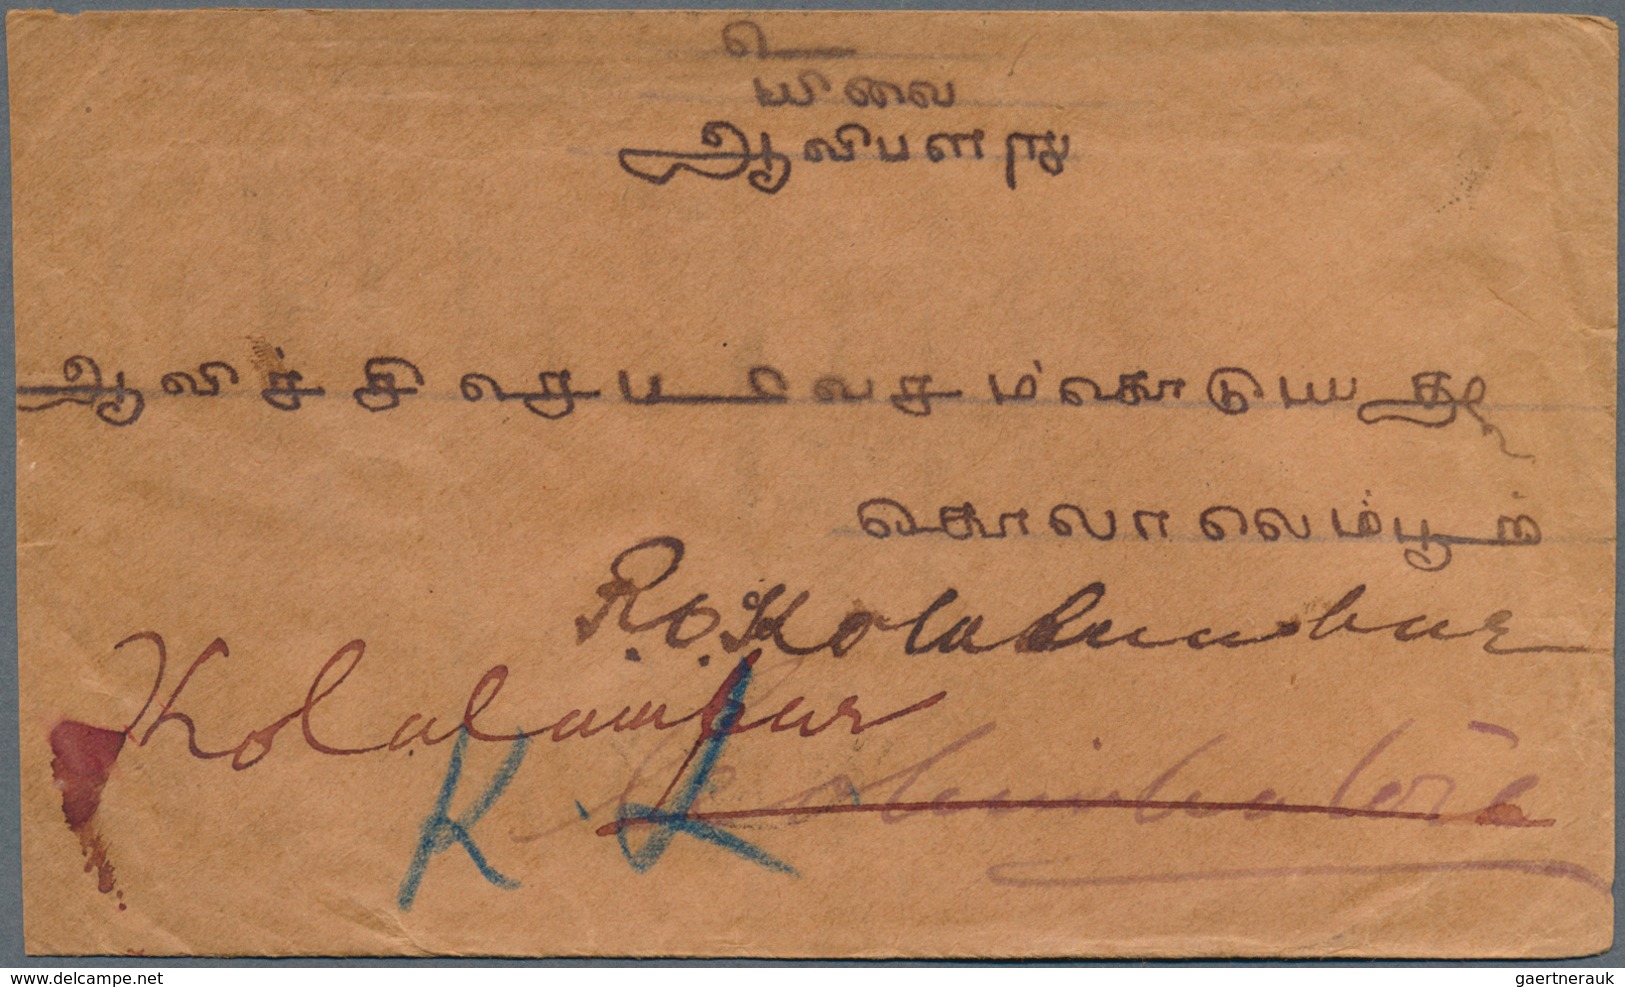 Malaiische Staaten - Selangor: 1925, TRAVELLING POST OFFICE: Two Incoming Covers From India Or Engla - Selangor